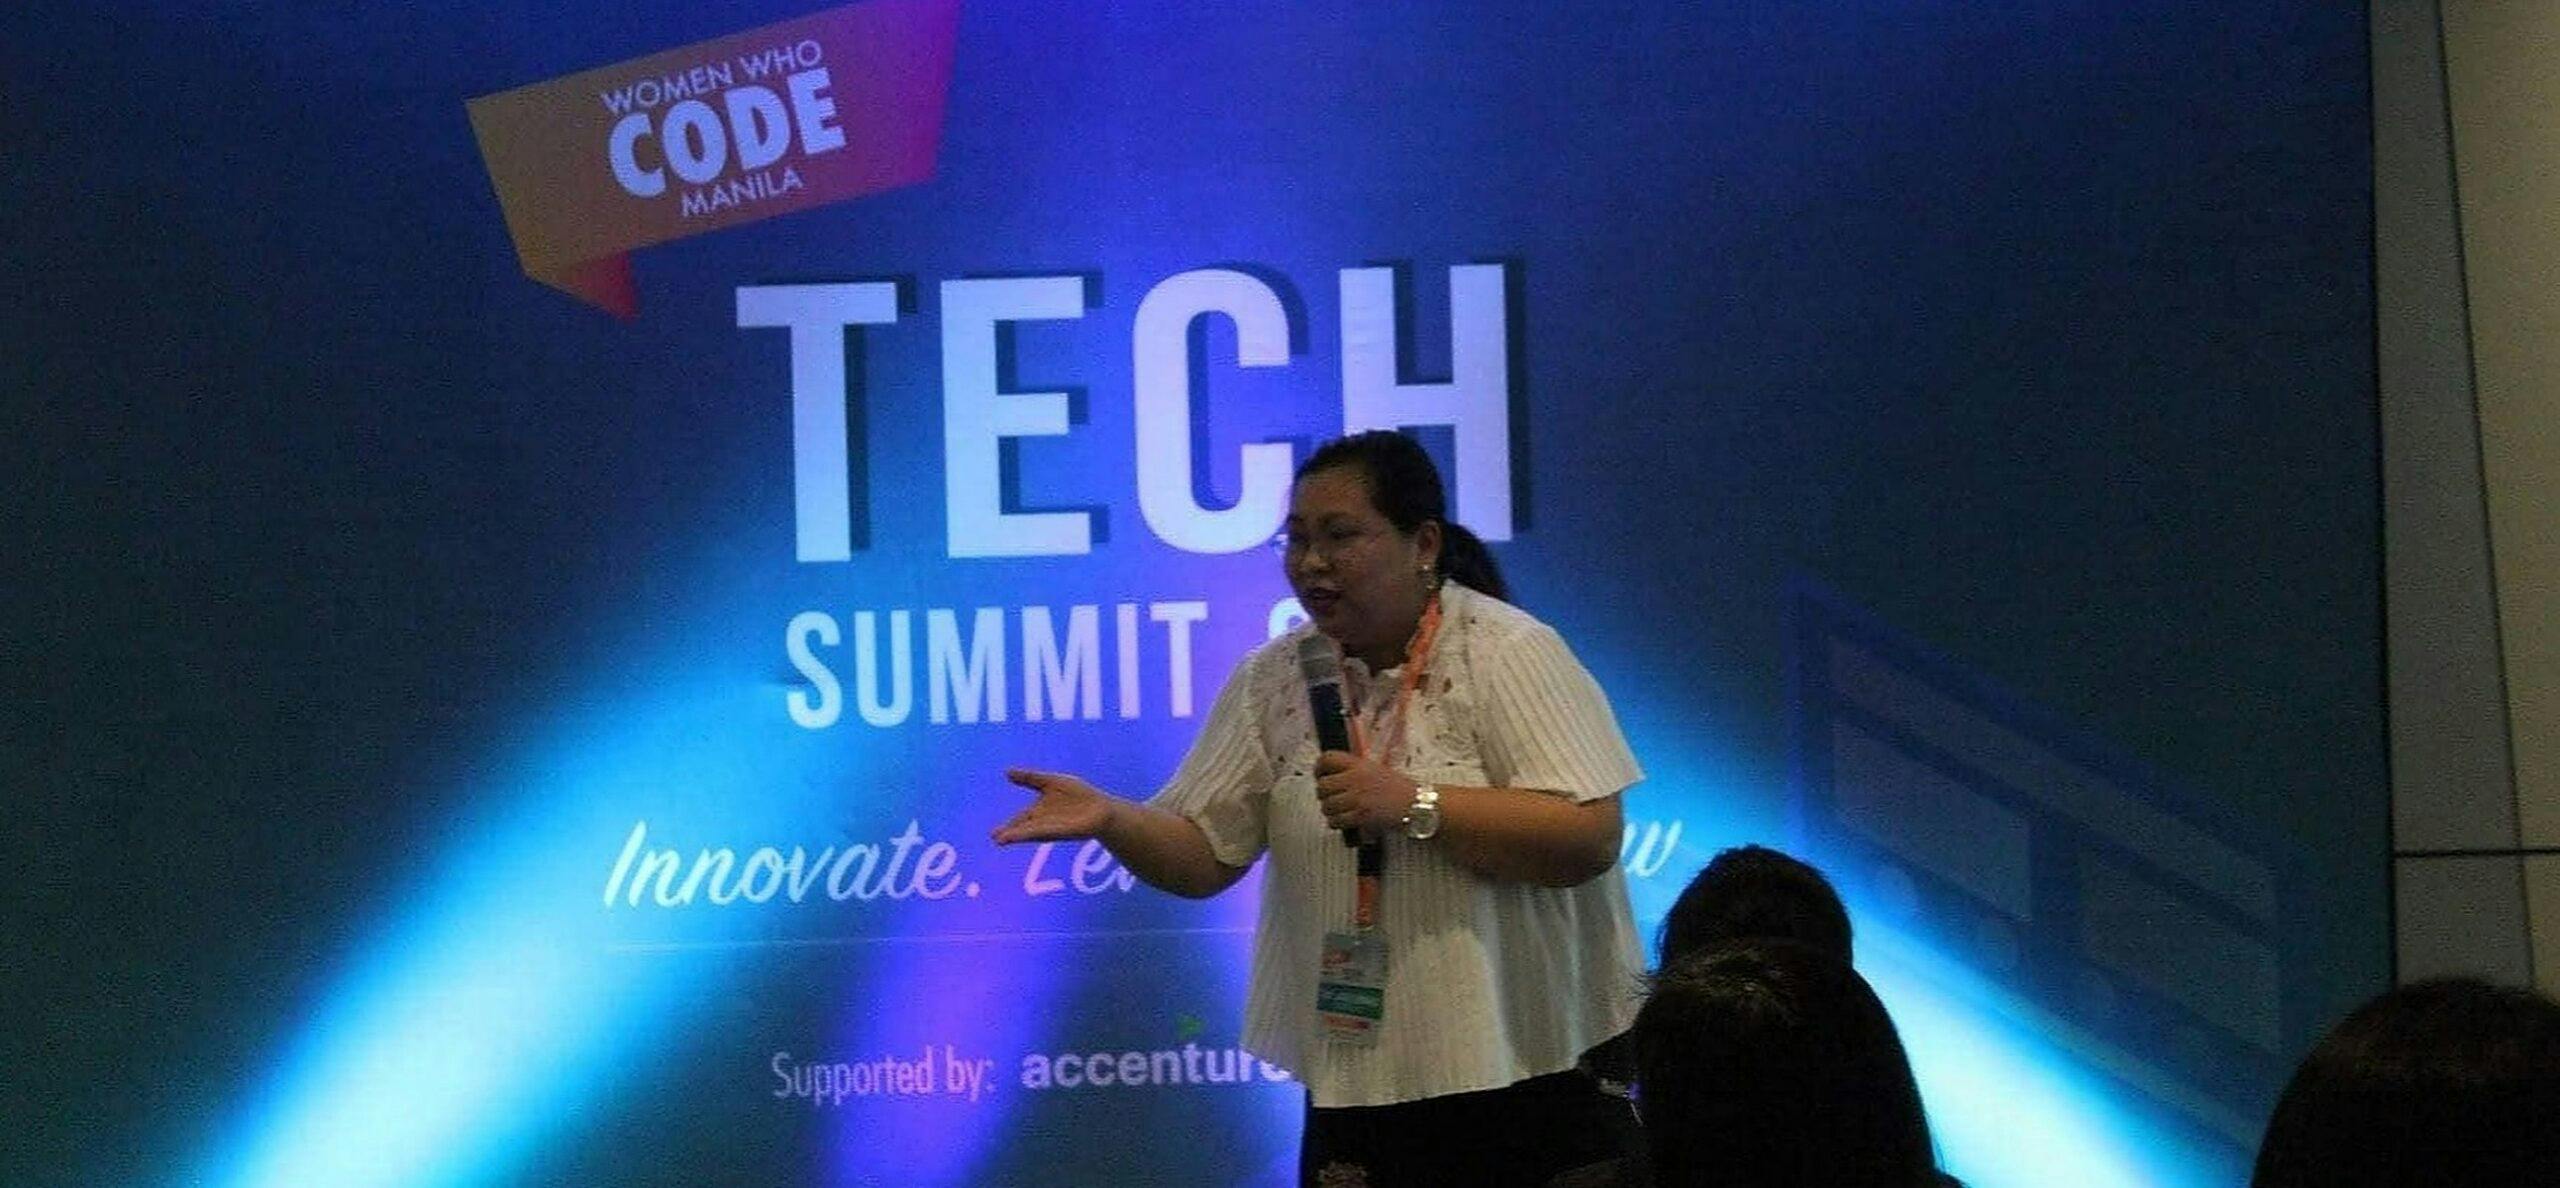 Highlights of My Experience at the Women Who Code Manila Tech Summit 2018